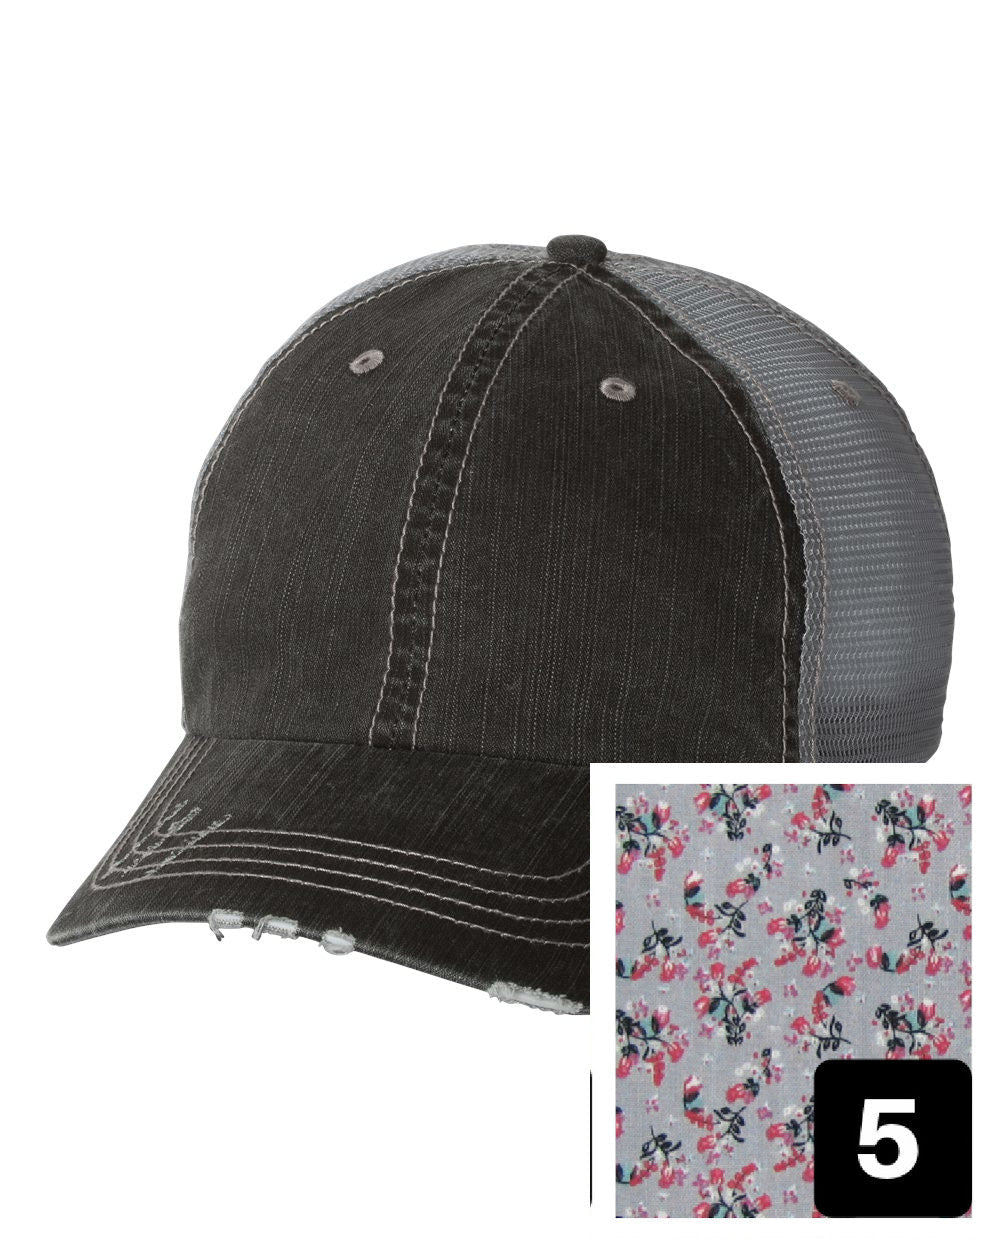 gray distressed trucker hat with purple and pink floral fabric state of Alaska